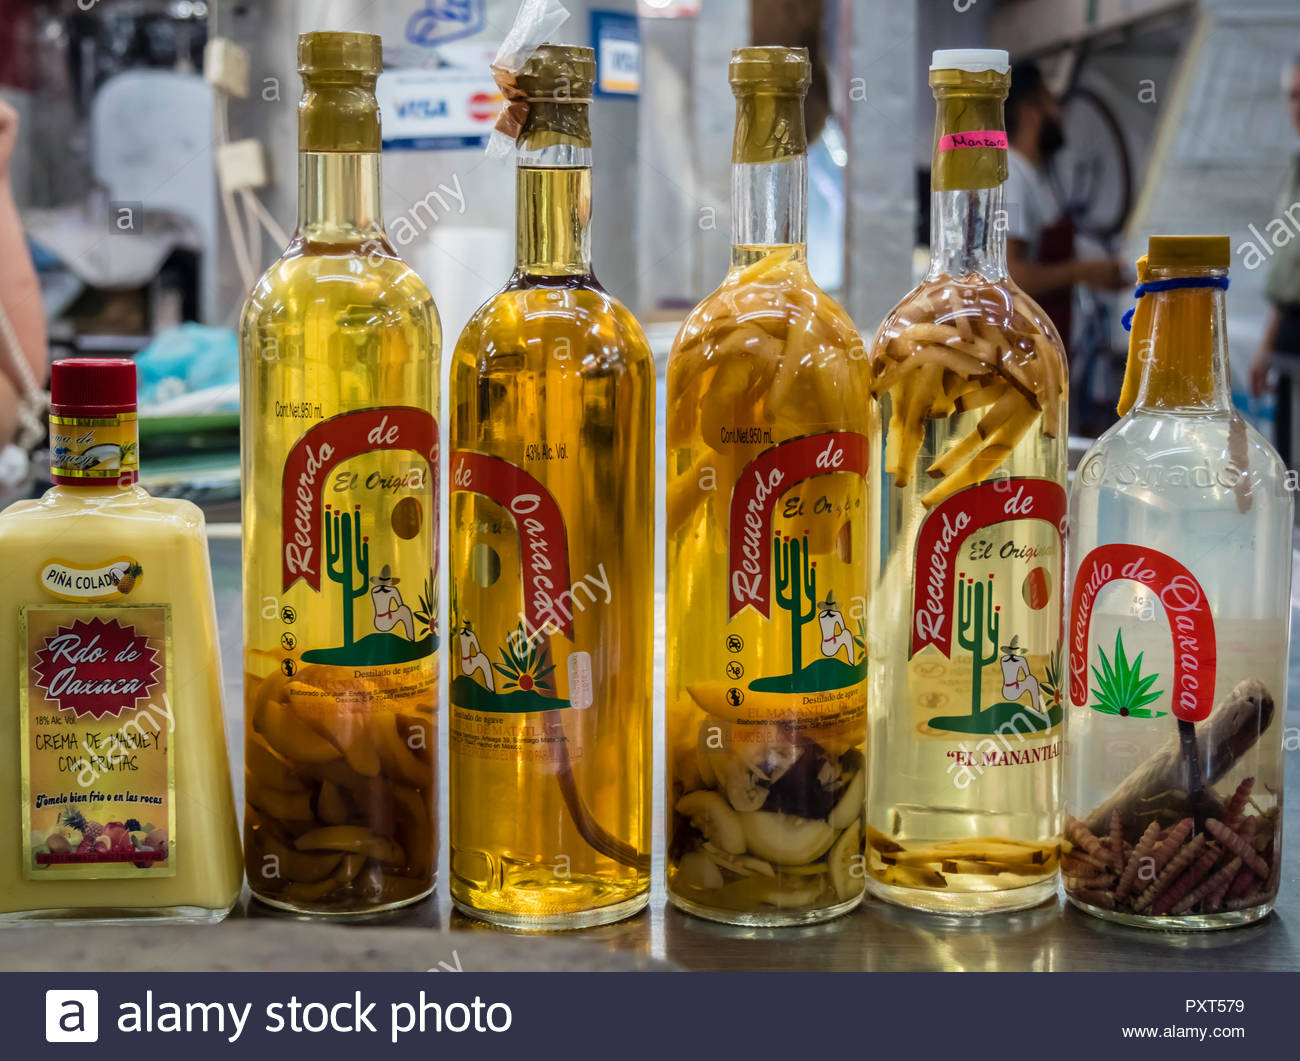 oct-21-2018-mexico-city-variety-of-tequila-with-worms-PXT579.jpg